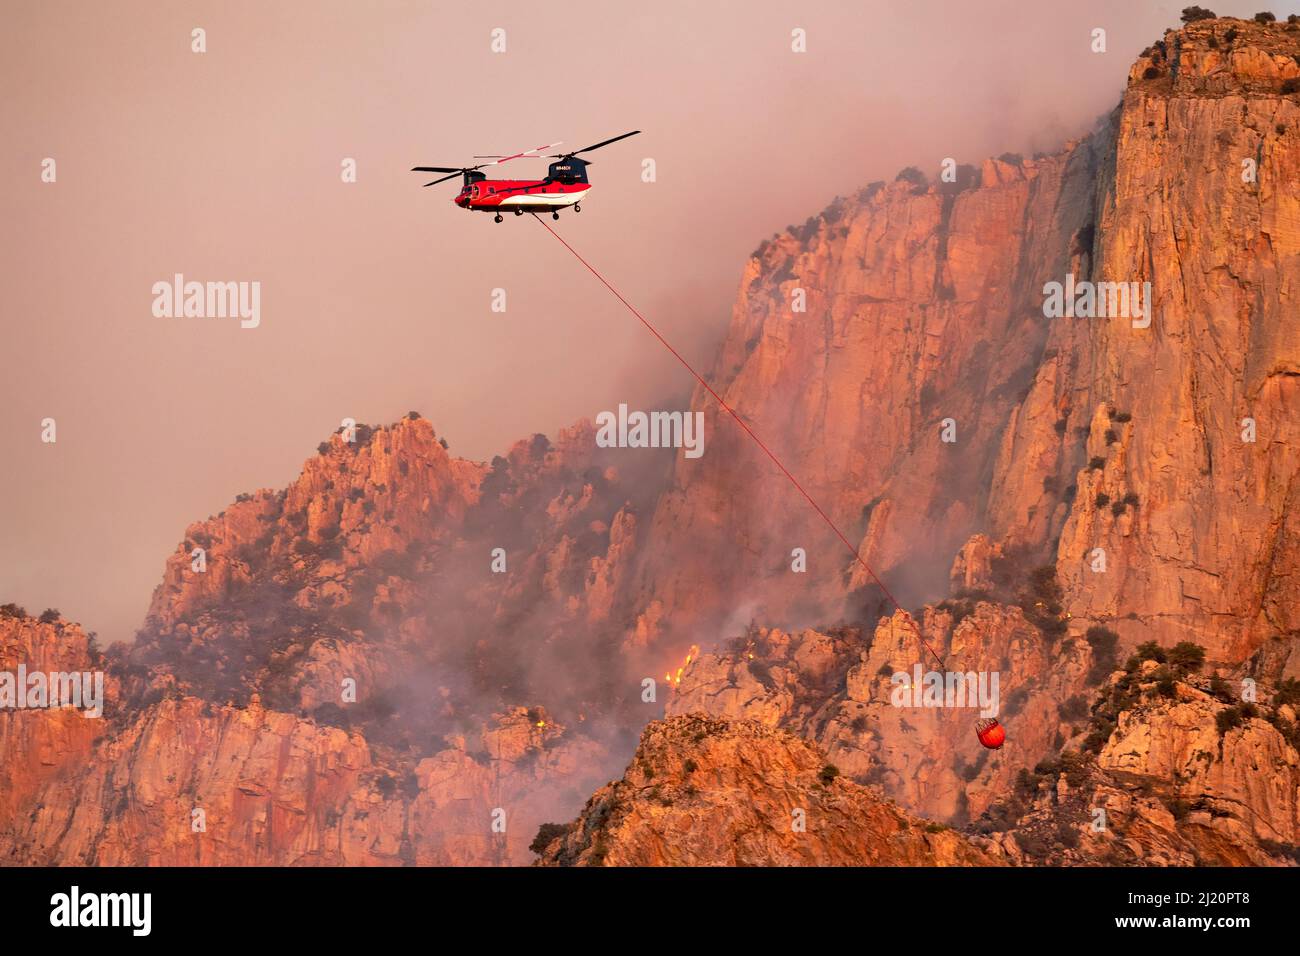 Lightning started fire on steep craggy terrain,  with  US Forest Service Fire suppression Wildland Firefighters using helicopters to 'bomb' the hot sp Stock Photo